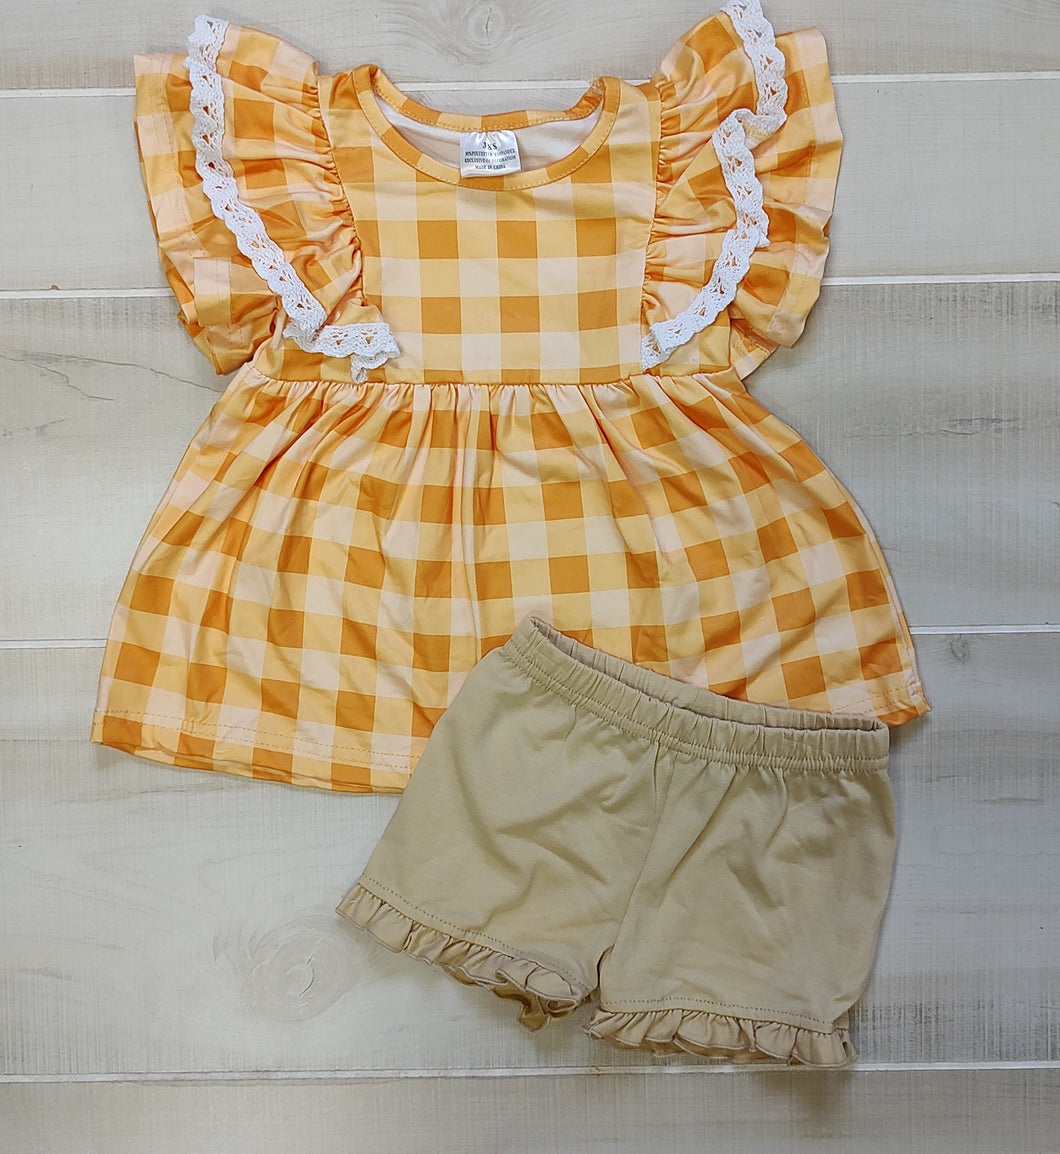 Golden yellow gingham style ruffled short outfit